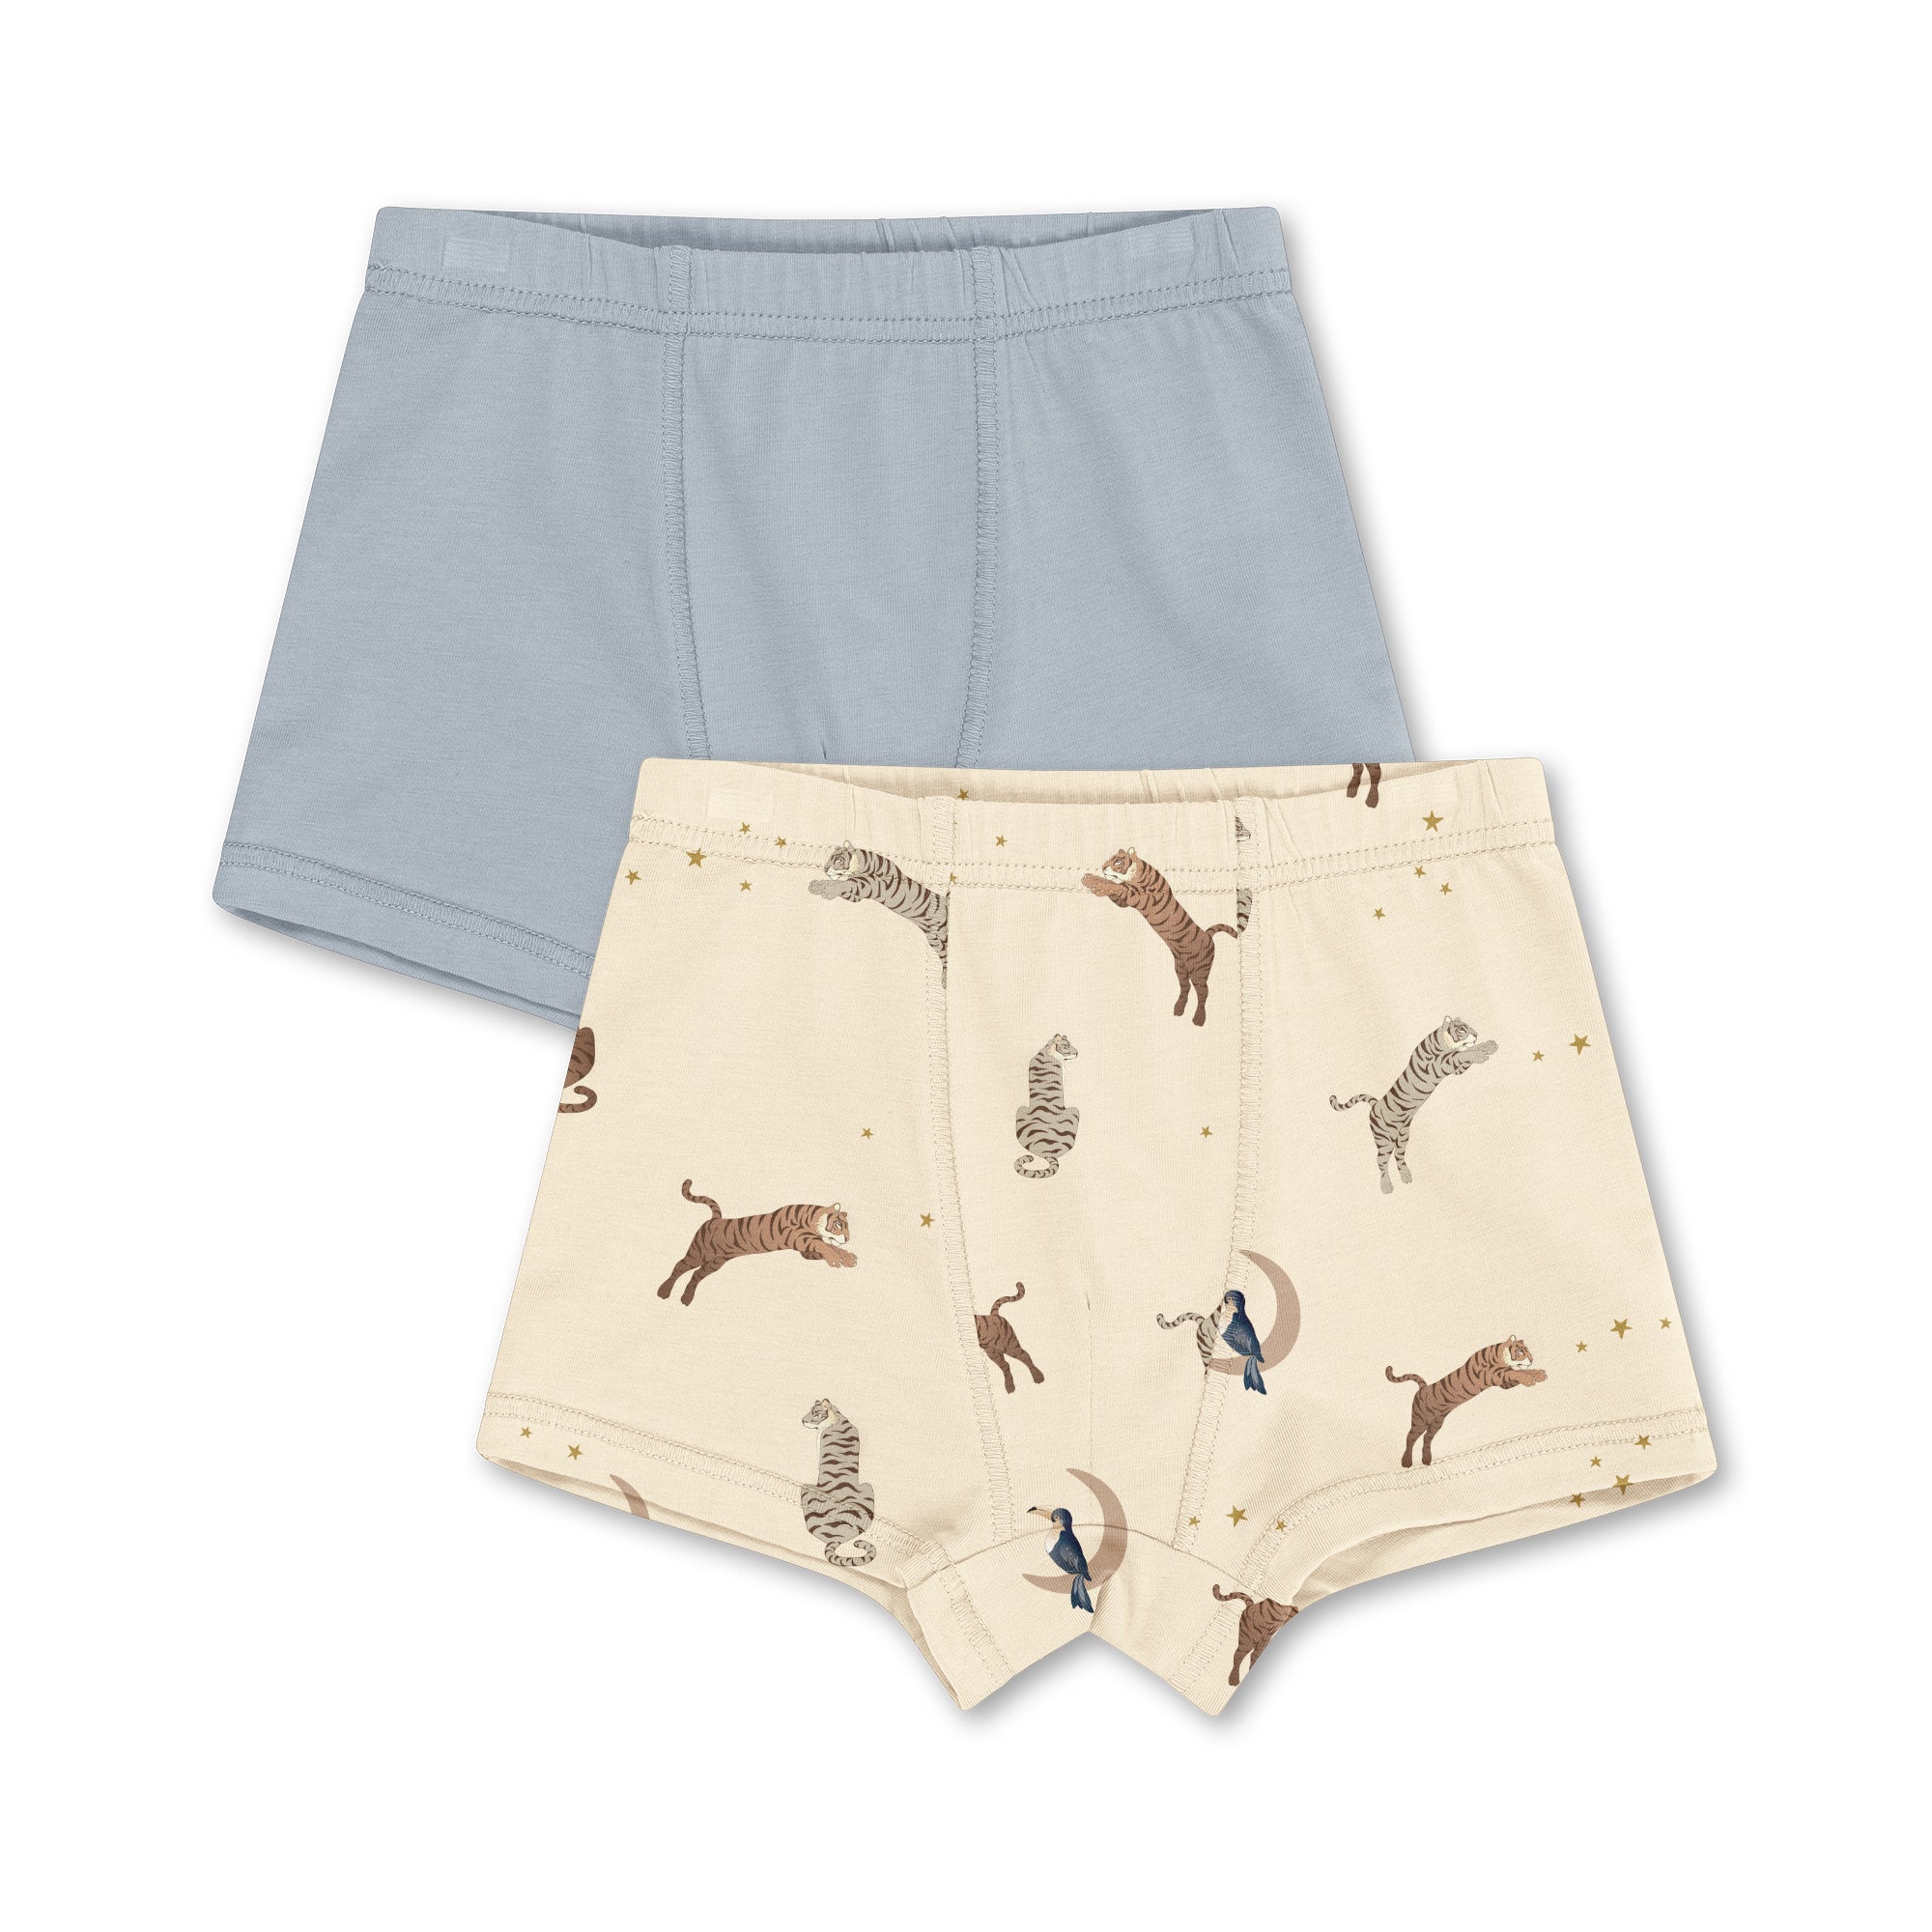 Boxers (2 Pack)